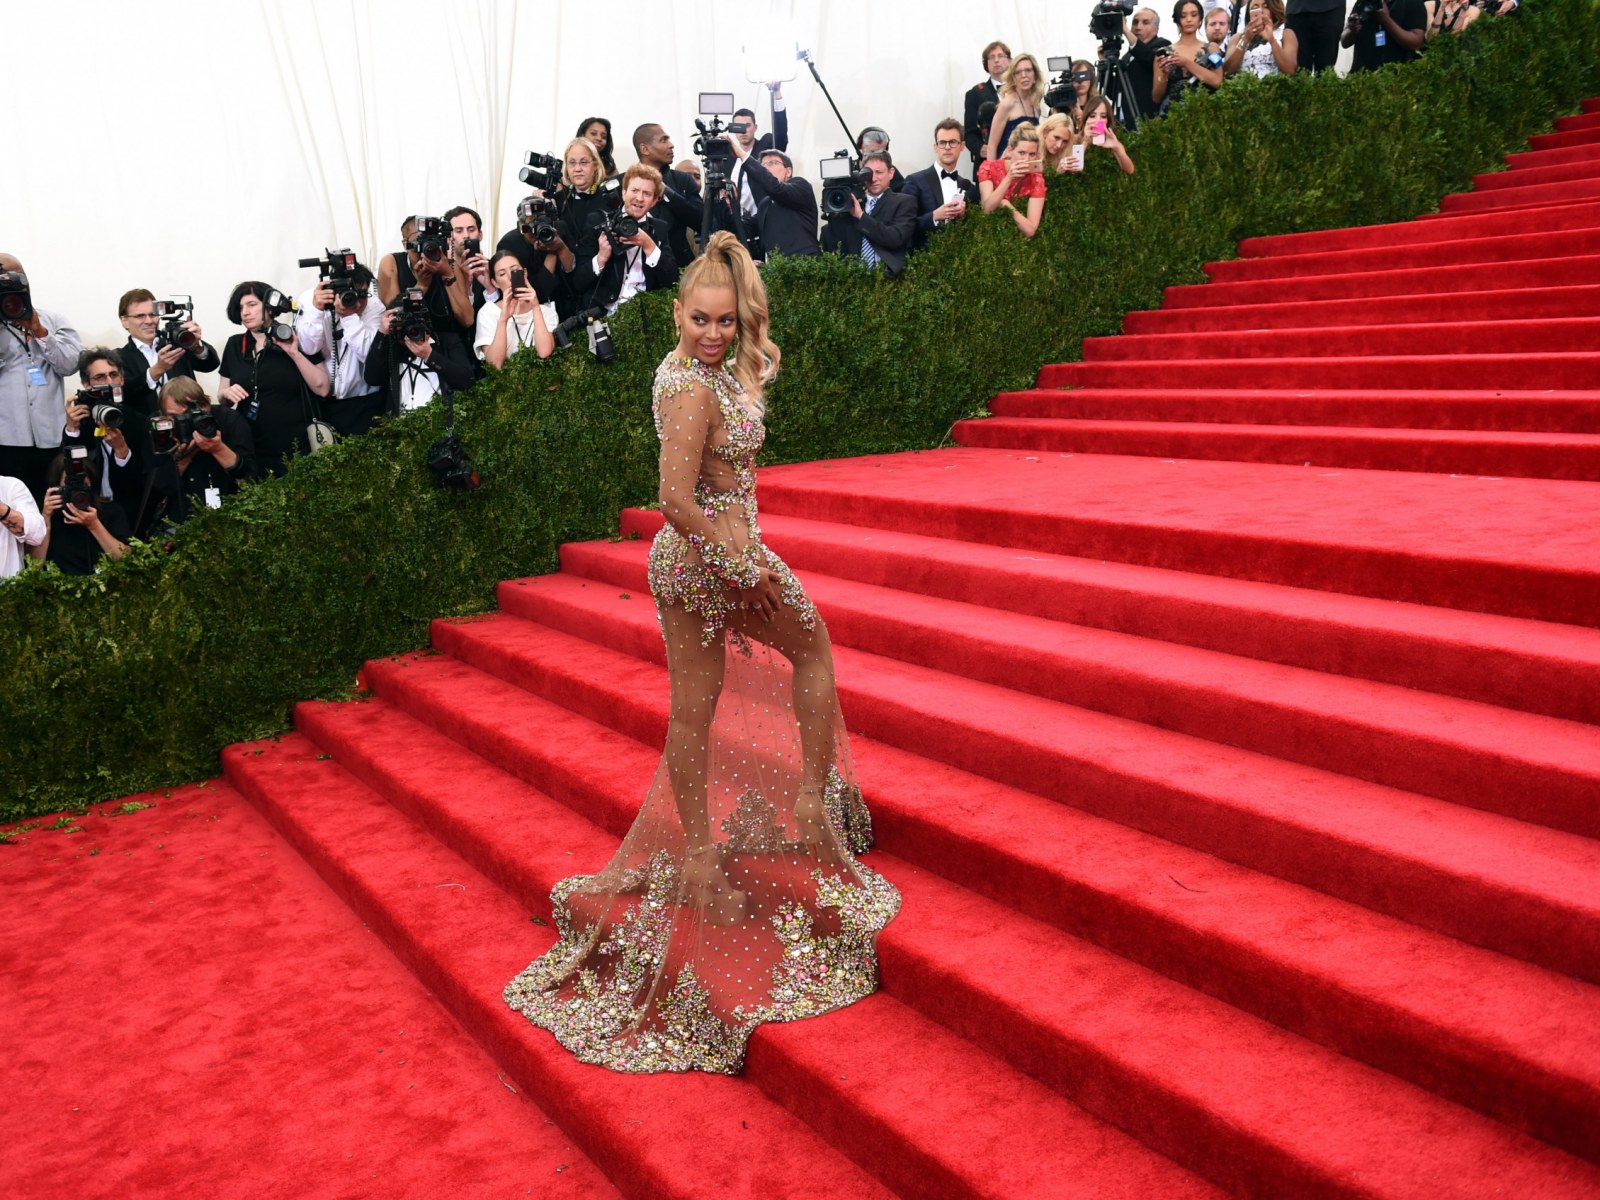 From Cher to Rihanna: The Most Iconic Met Gala Outfits of All-Time